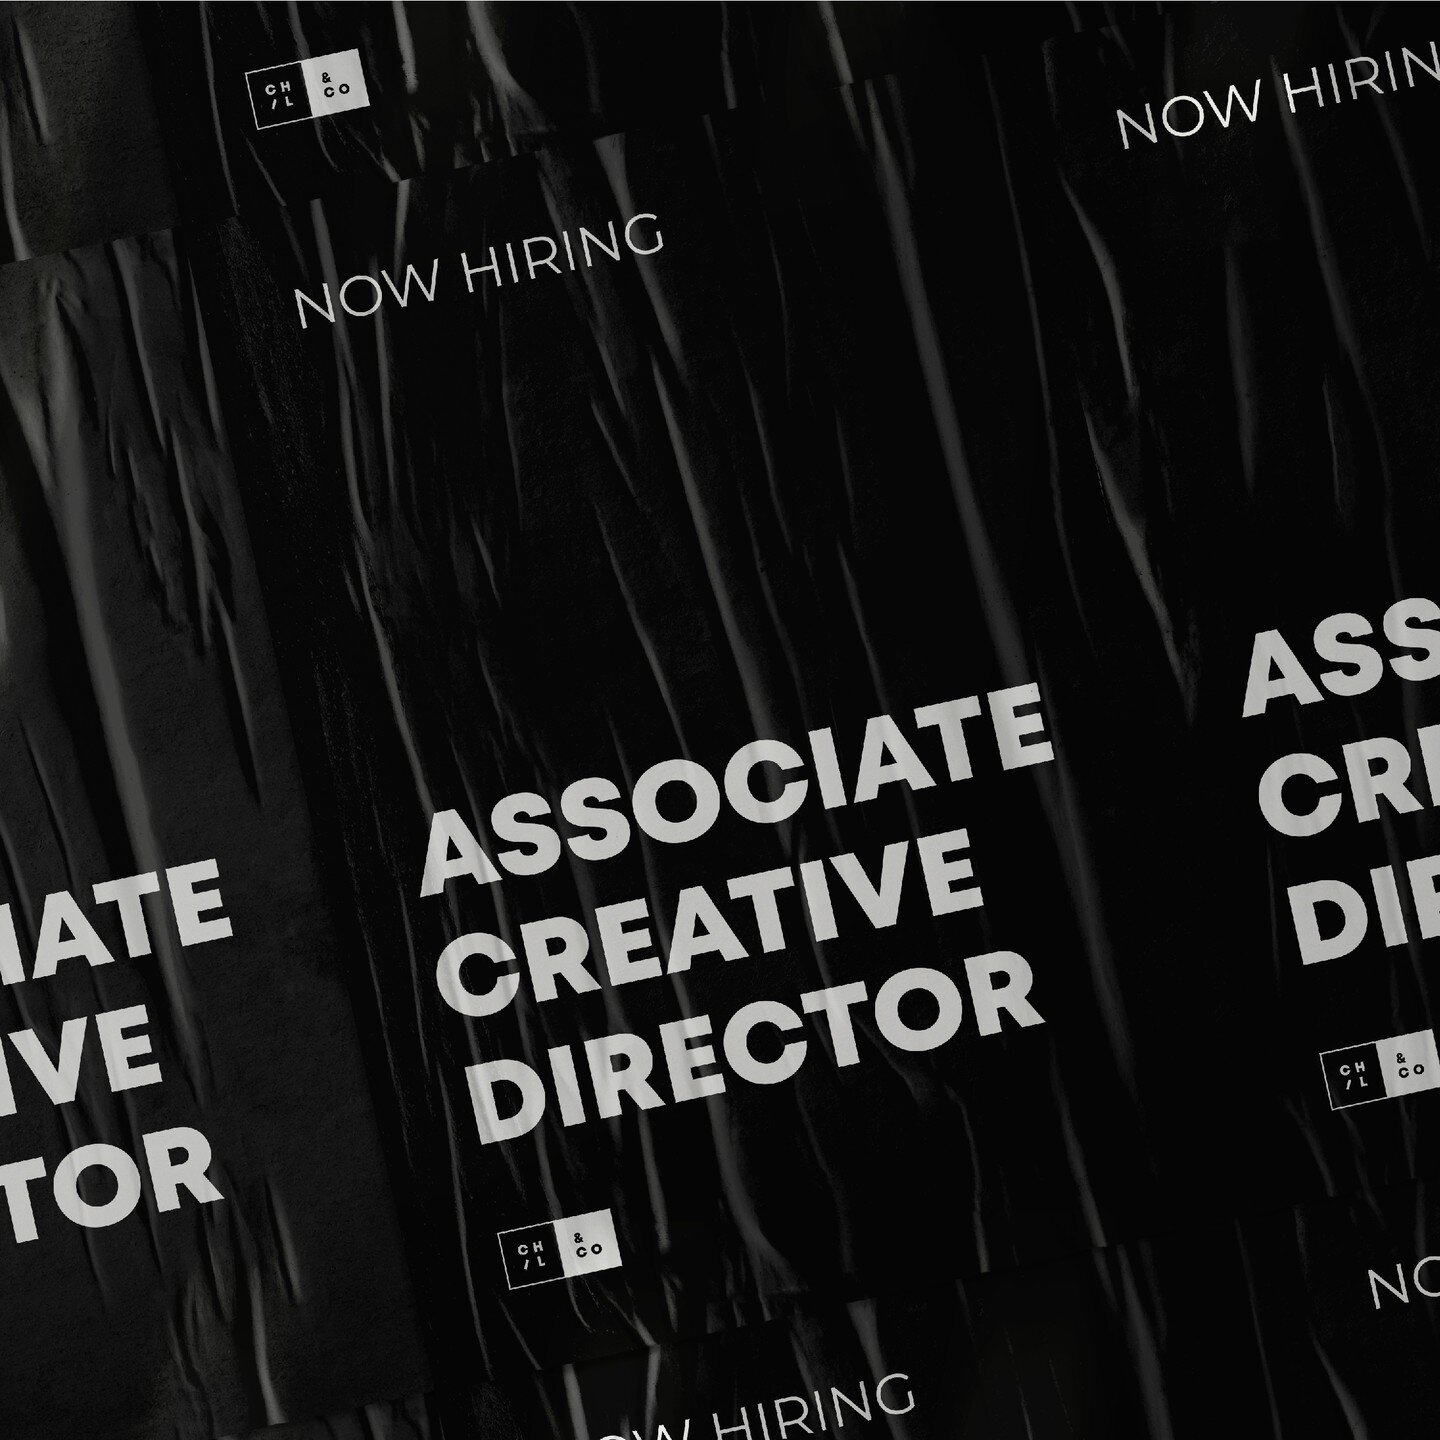 We are looking for an enthusiastic, versatile and innovative individual to fill the role of a Jr. Creative Director within our agency. We are looking for someone who is knowledgeable in a variety of creative processes. Click on the link in our bio to